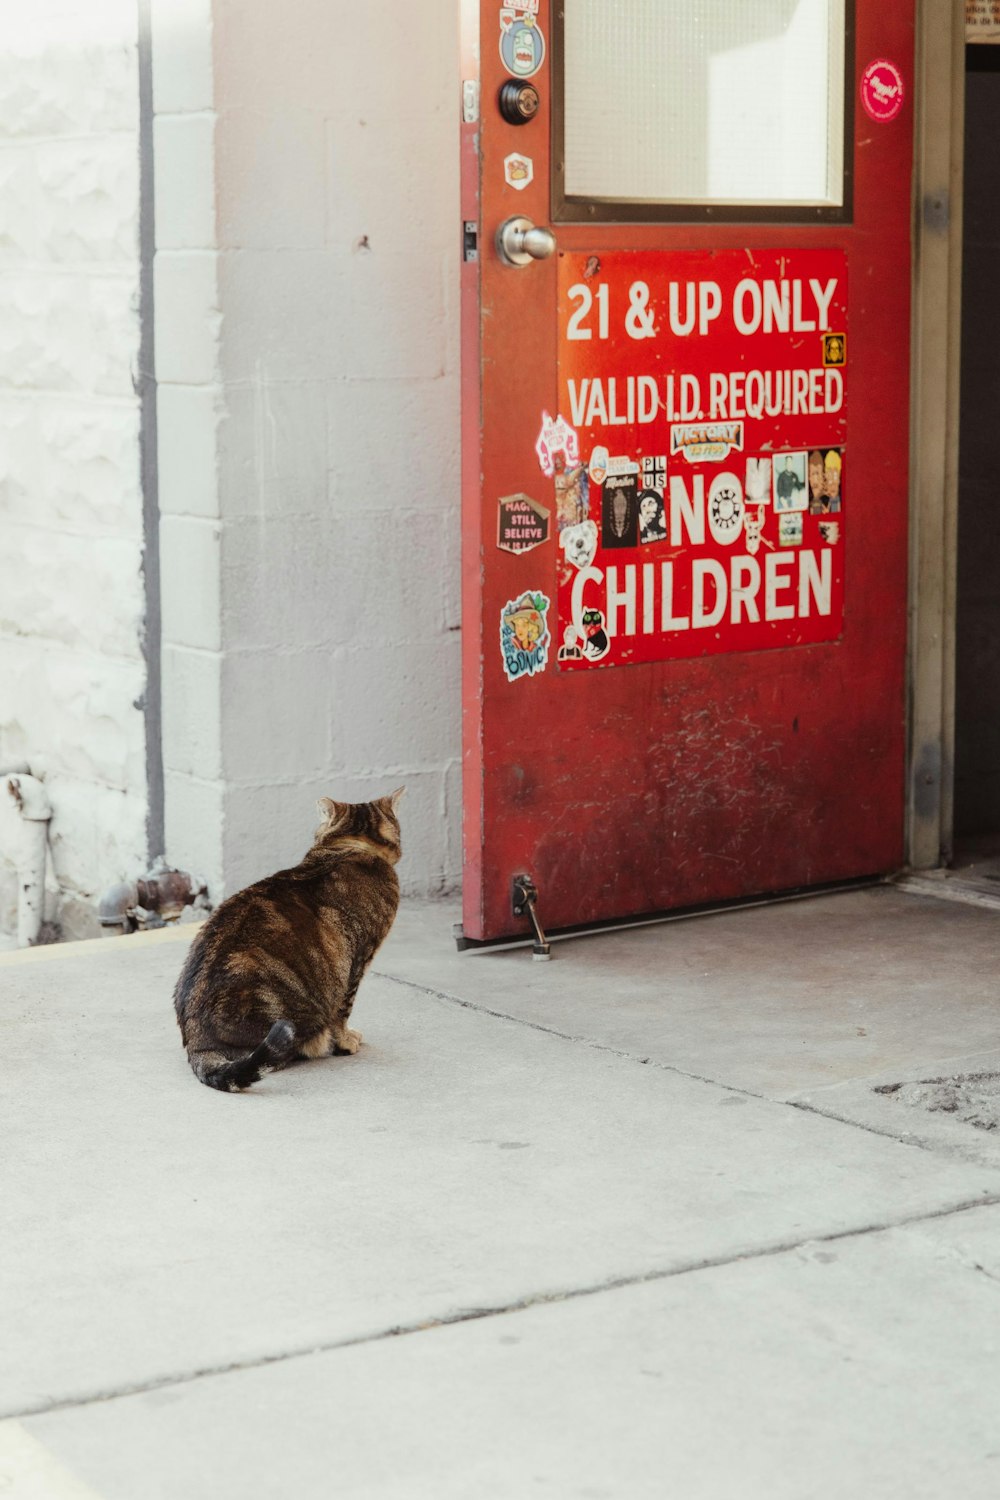 a cat sitting in front of a red door